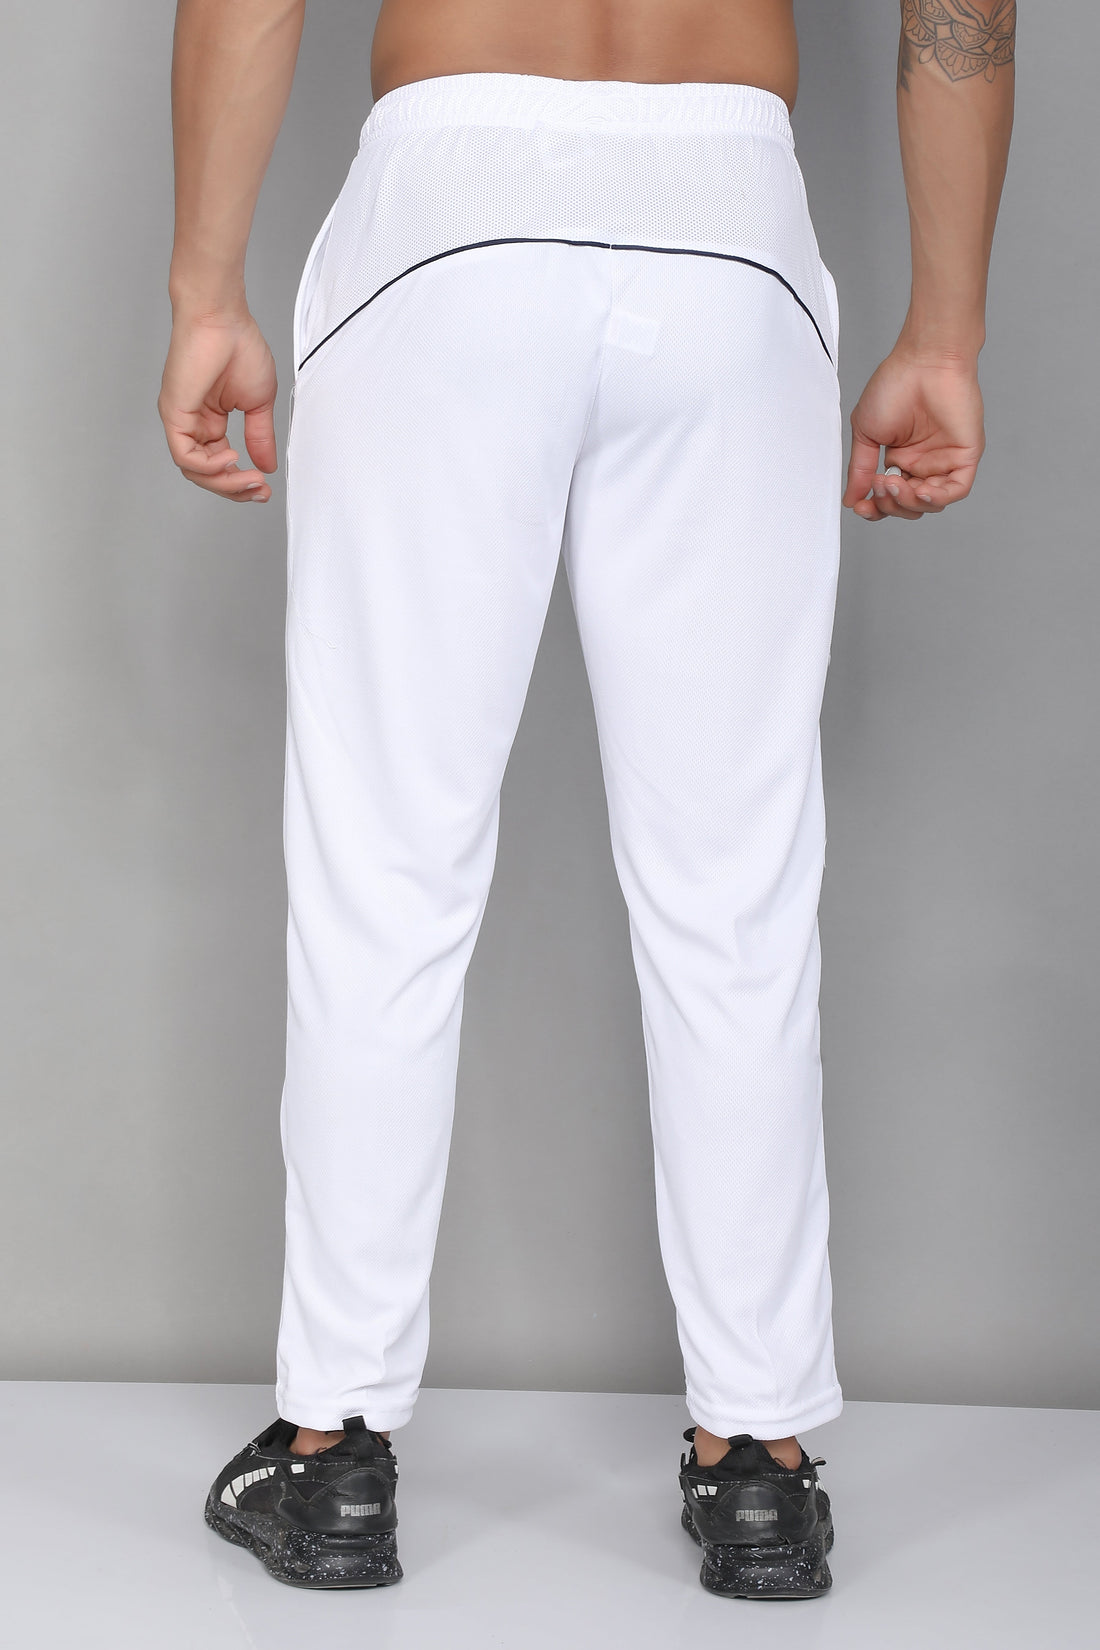 Gotti Wear Track Pants (Style 1) - Wooter Apparel